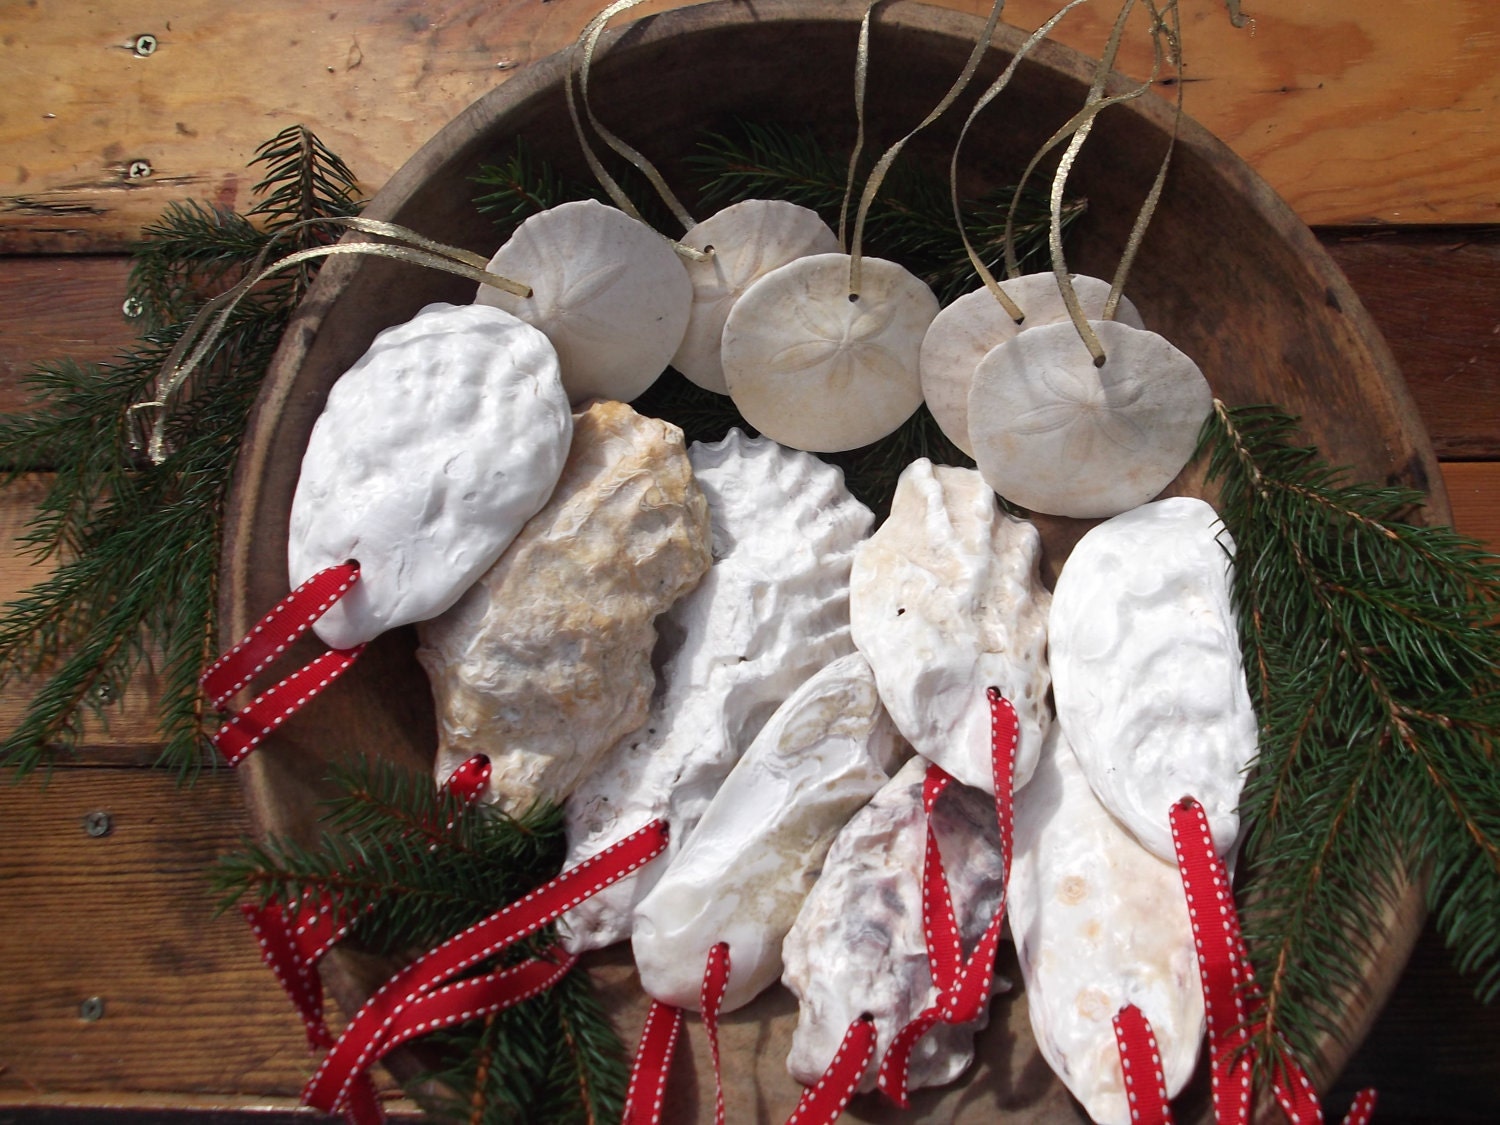 Sand Dollar and Oyster Shell Ornaments